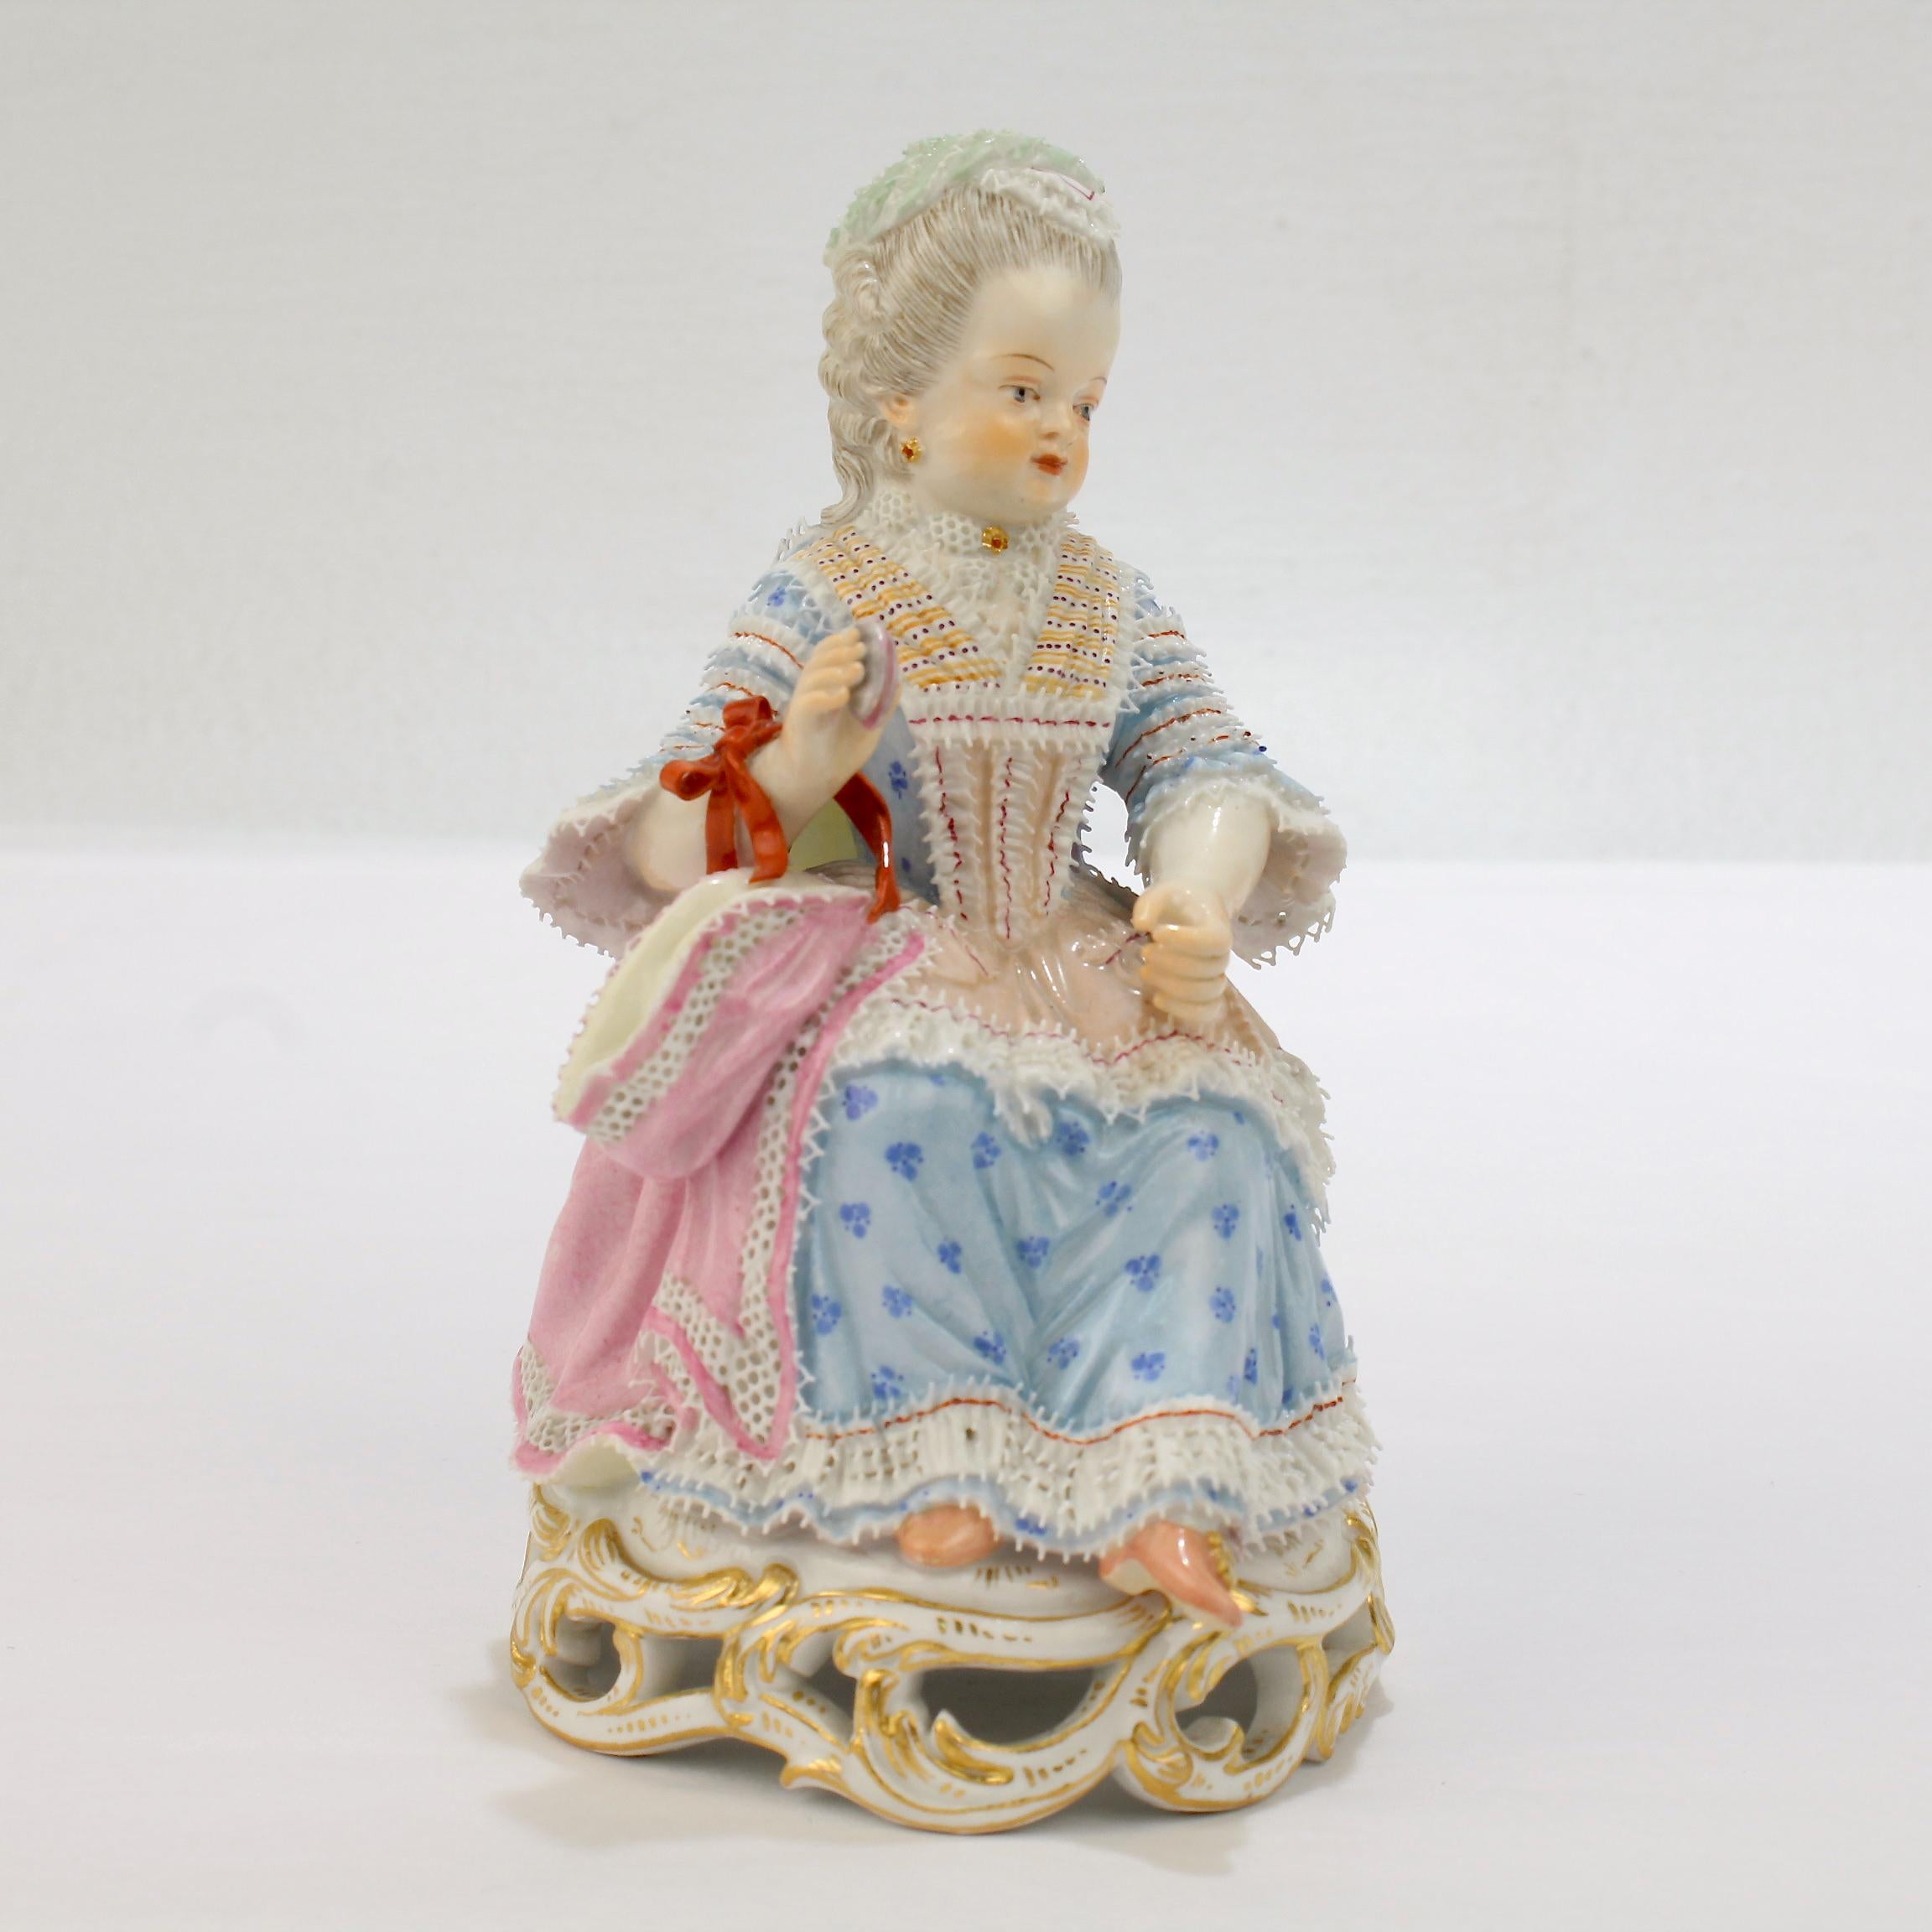 German Antique Meissen Porcelain Figurine of a Girl with a Thread Winder Model No. C 28